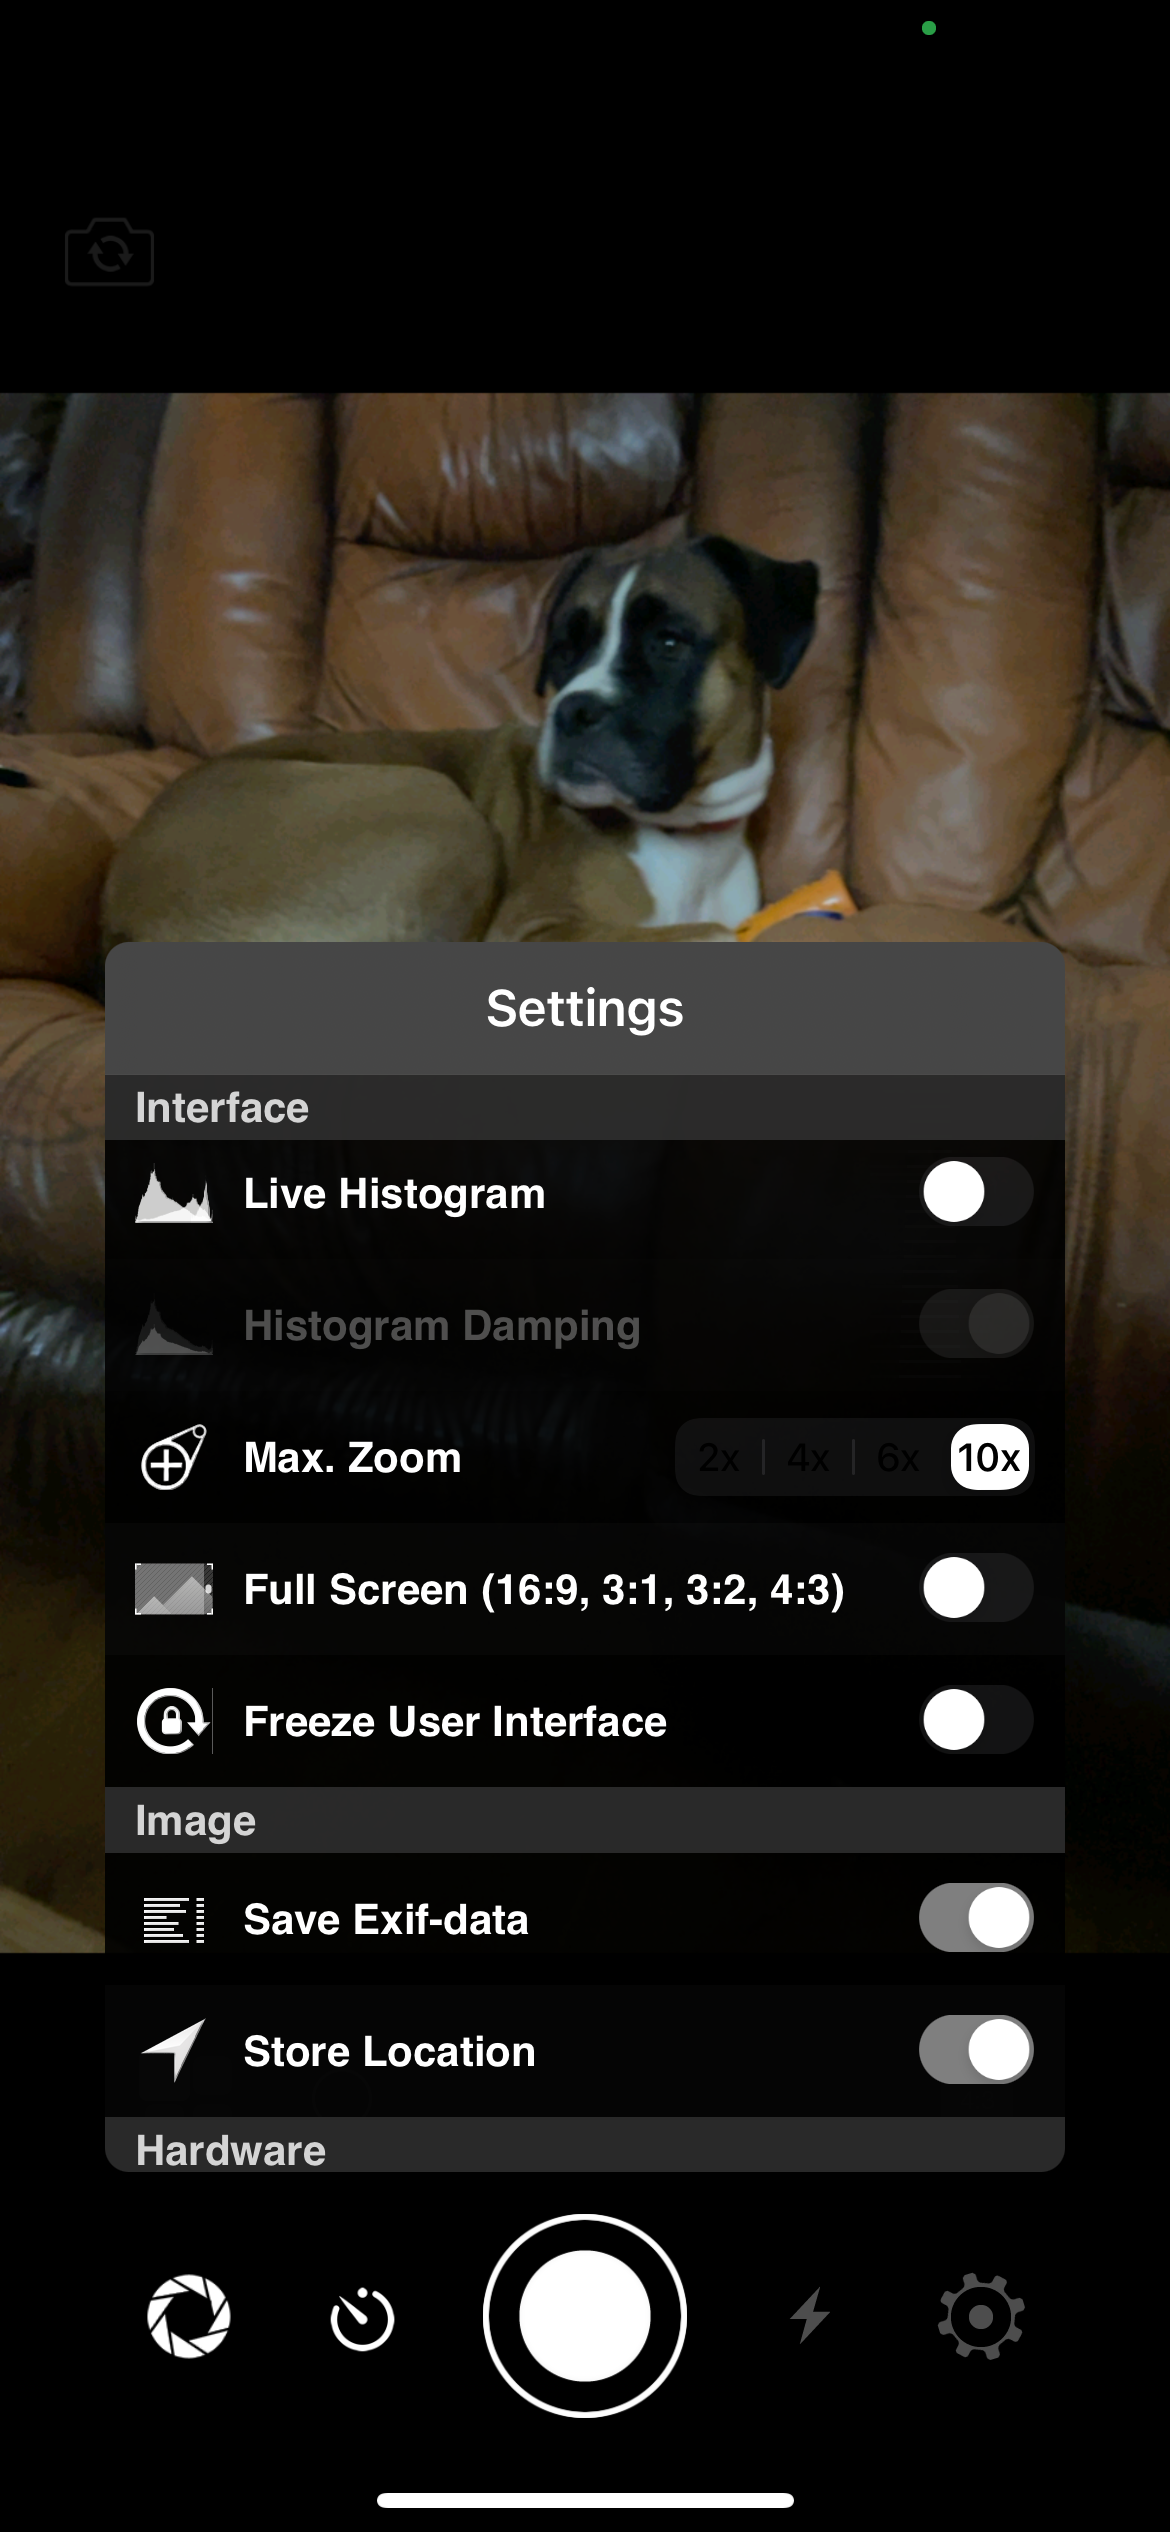 Night Camera screenshot showing the settings and a brown dog in the background